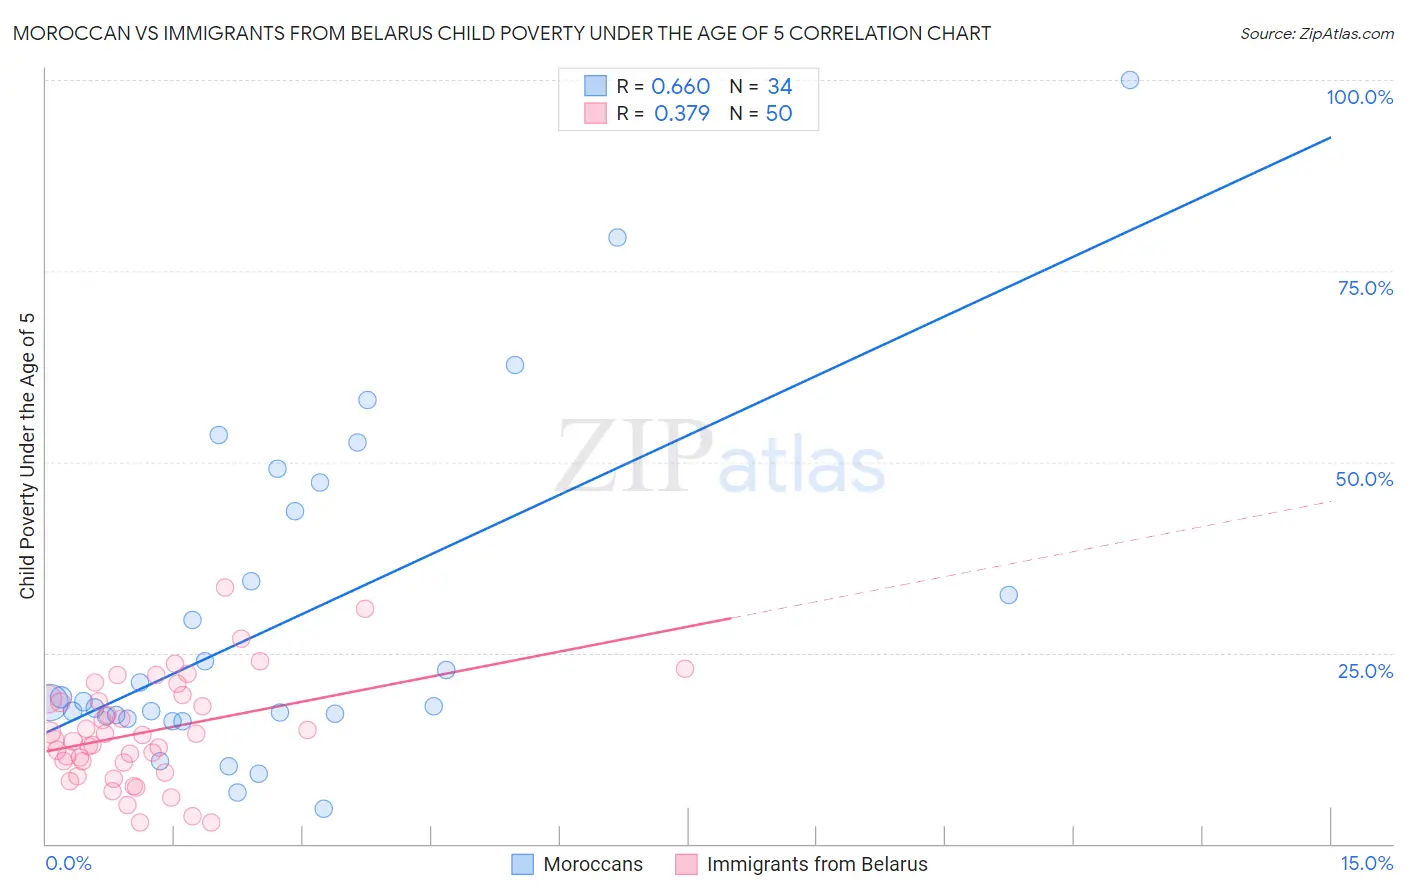 Moroccan vs Immigrants from Belarus Child Poverty Under the Age of 5